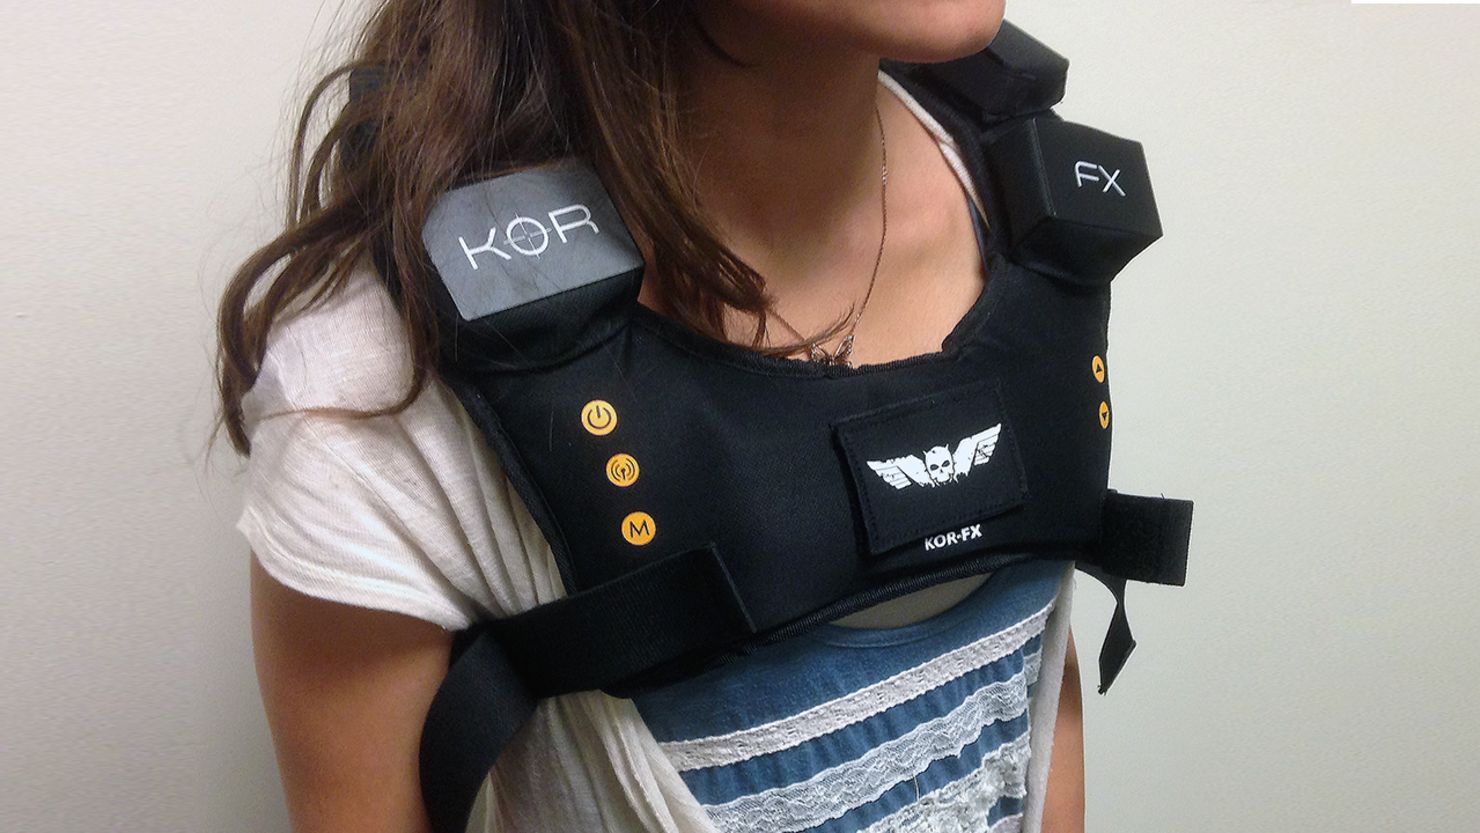 The KOR-FX vest takes audio from game systems, movies and music and turns it into vibrations the wearer can feel on their body.